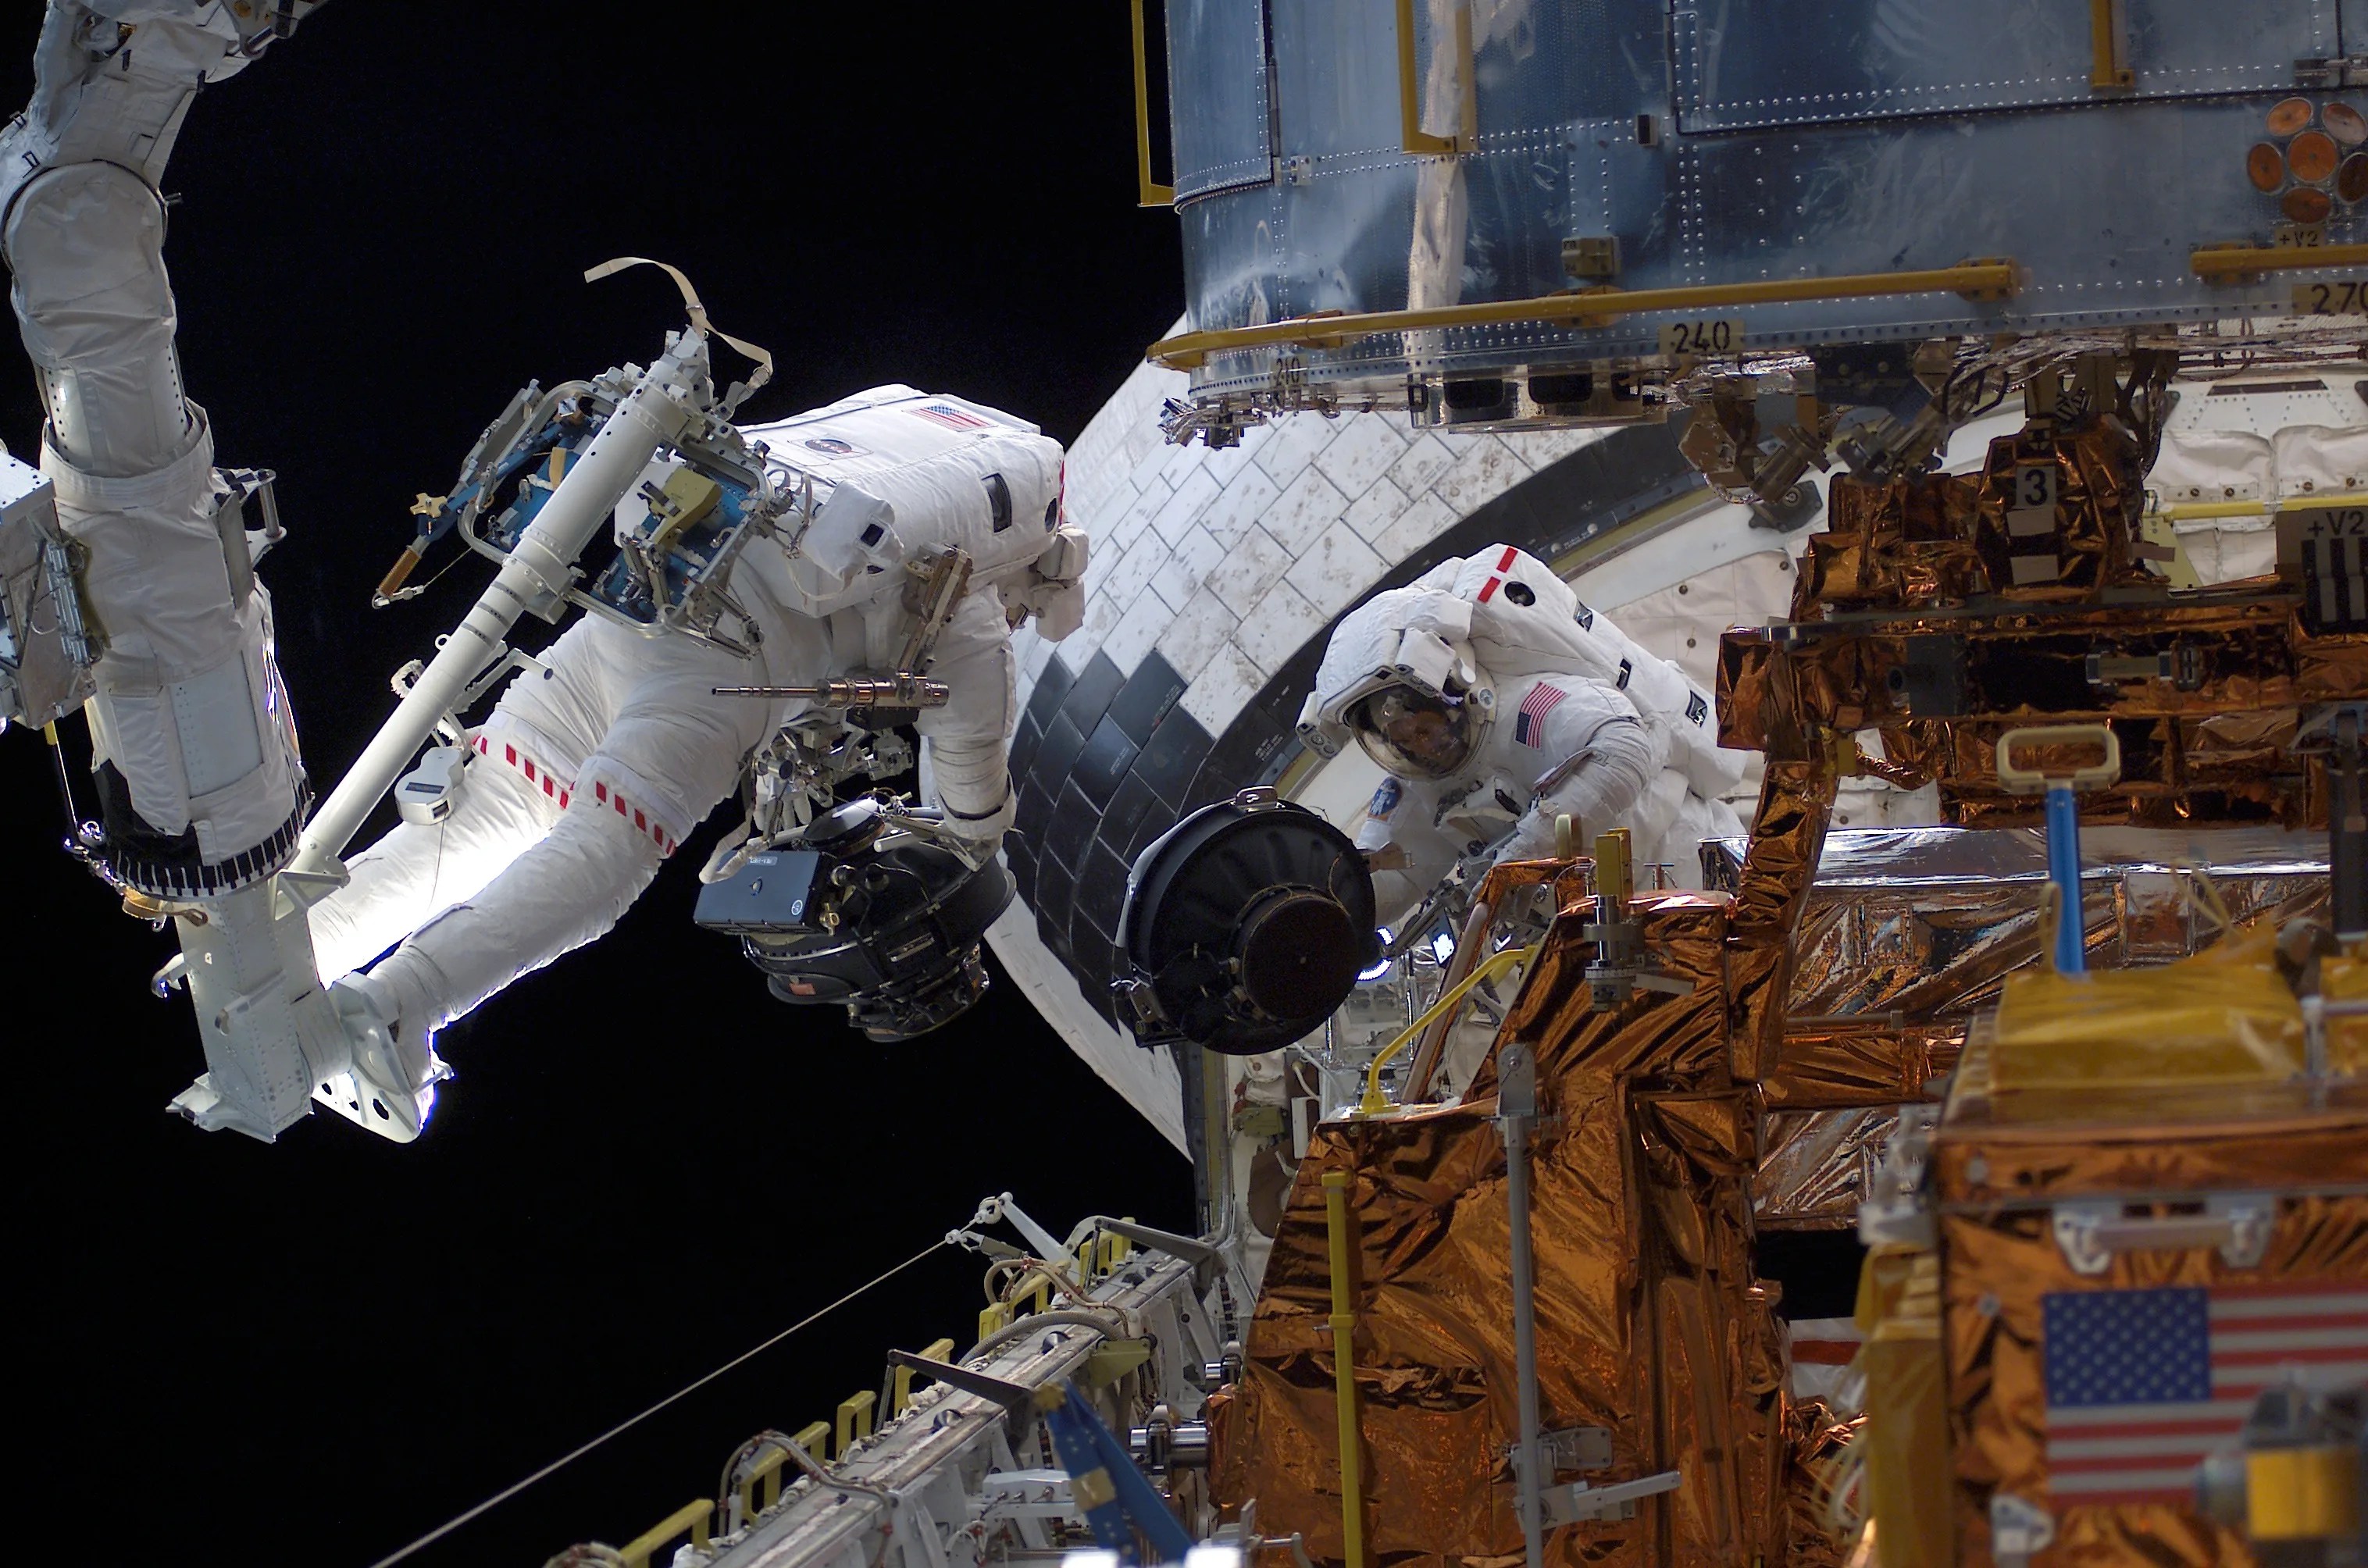 Two spacewalking astronauts, one standing attached to the space shuttle's robotic arm, work on the Hubble Space Telescope in the shuttle's cargo bay.